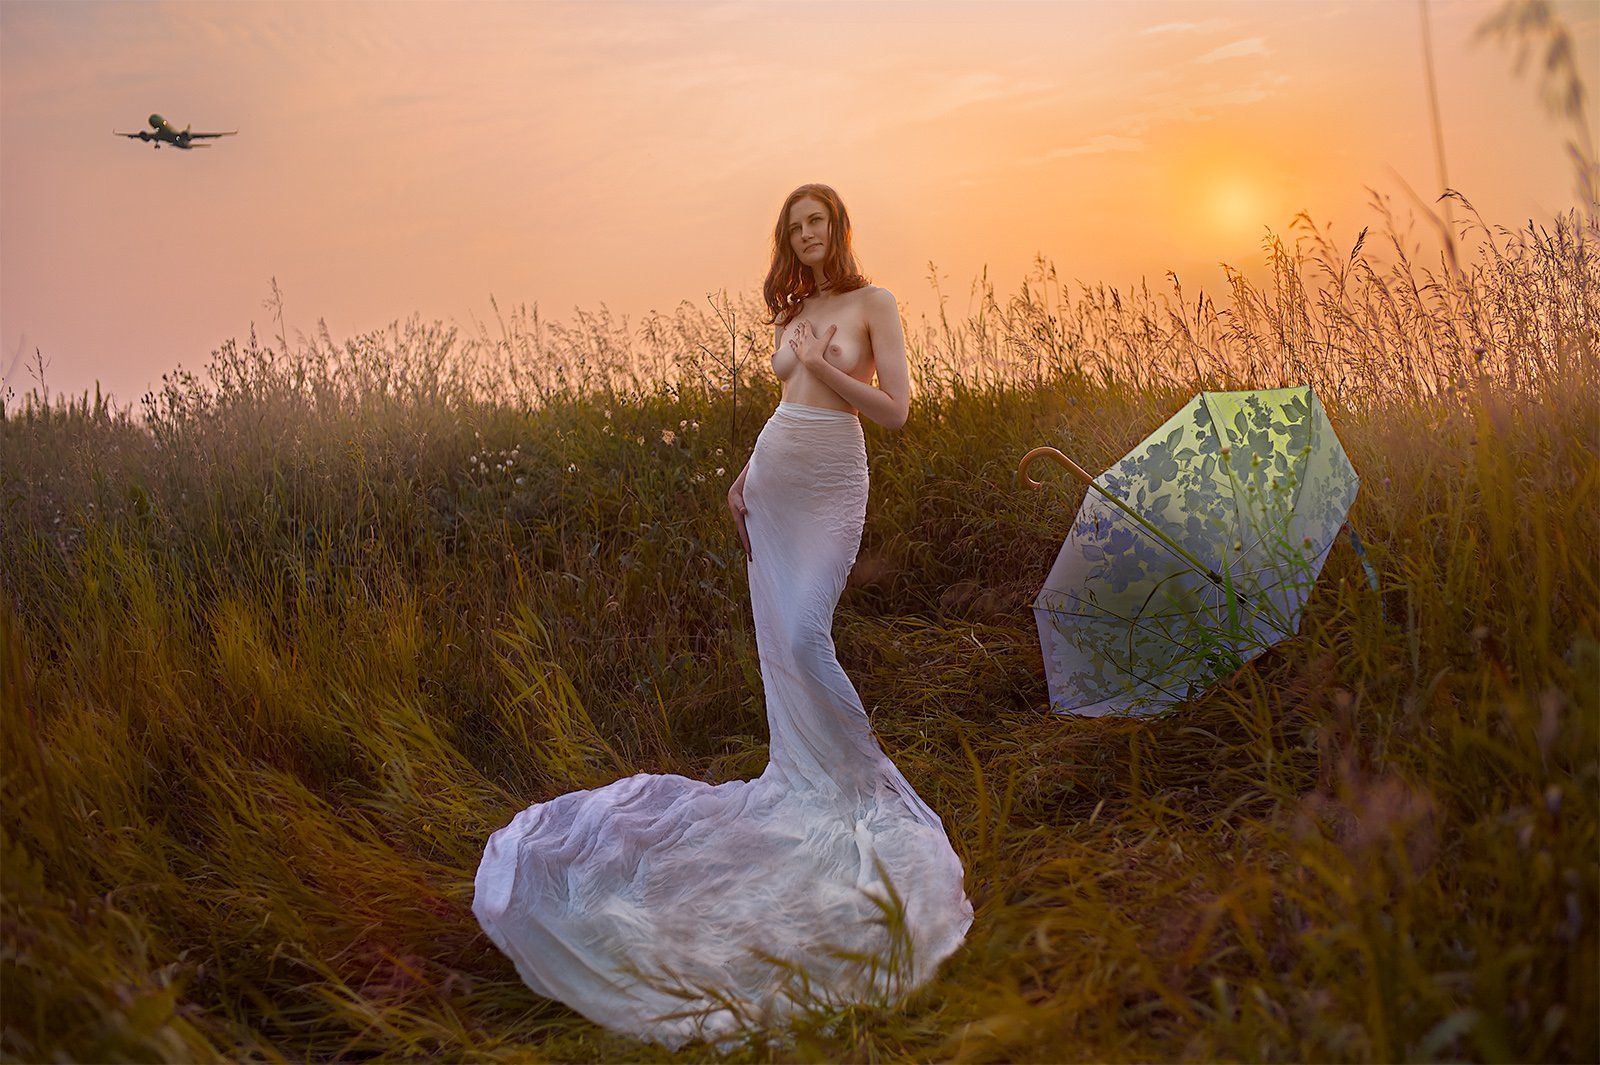 Outdoors  Day  Nature  Swan  White Color  girl  sun  sundown  sunflower  sunlight  sunny  sunrise  sunset  sunshine  beautiful  beauty  beauty in nature  single  people  airplane  umbrella  grass  sky  young  young women  fly  flying  meadow  hayfield  gr, Andrew Gnezdilov